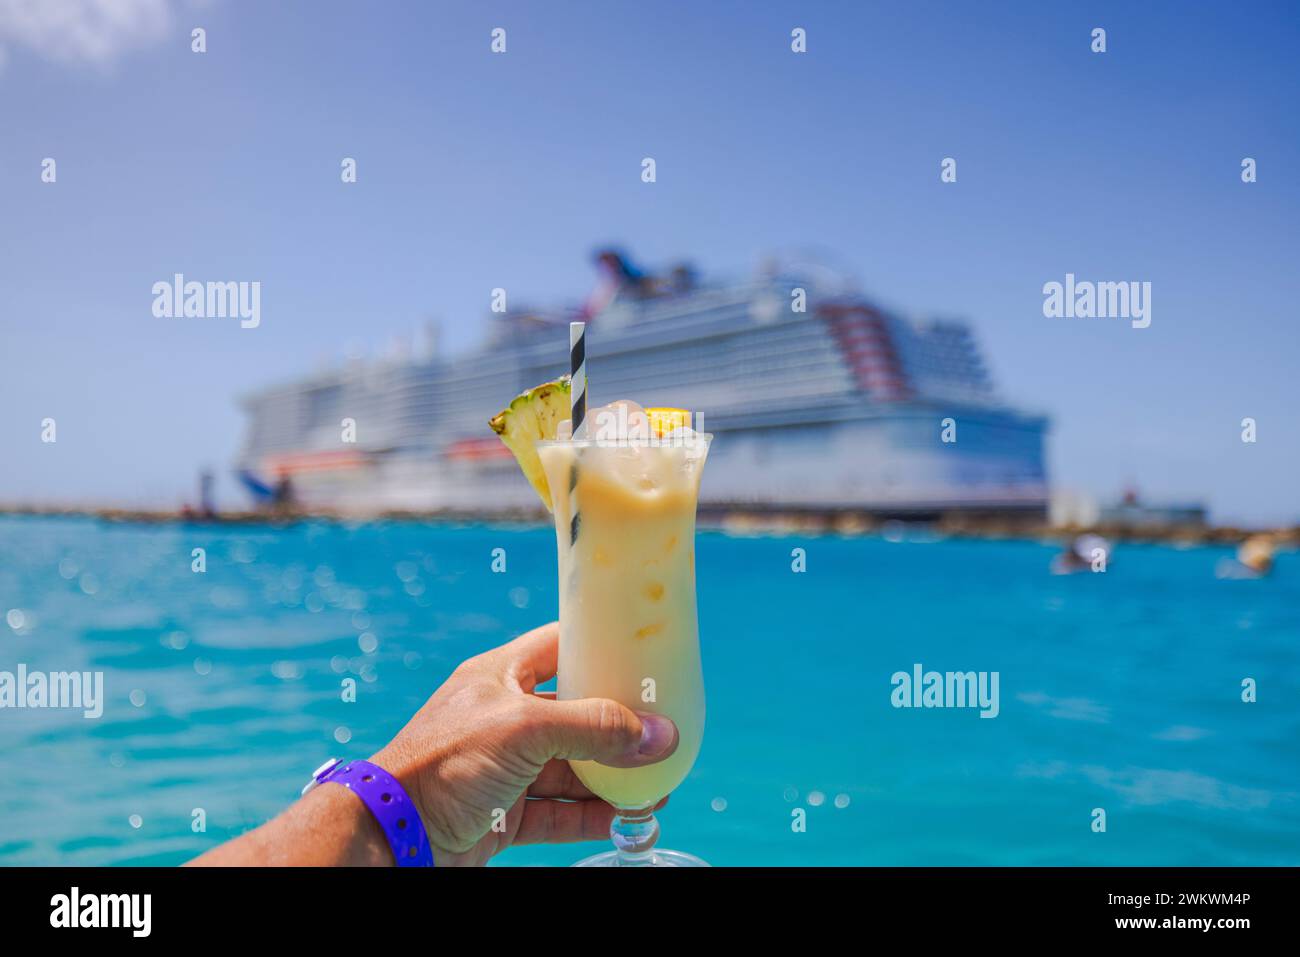 Beautiful view of man's hand holding glass of alcoholic cocktail with cruise liner in the background out of focus. Curacao. Stock Photo